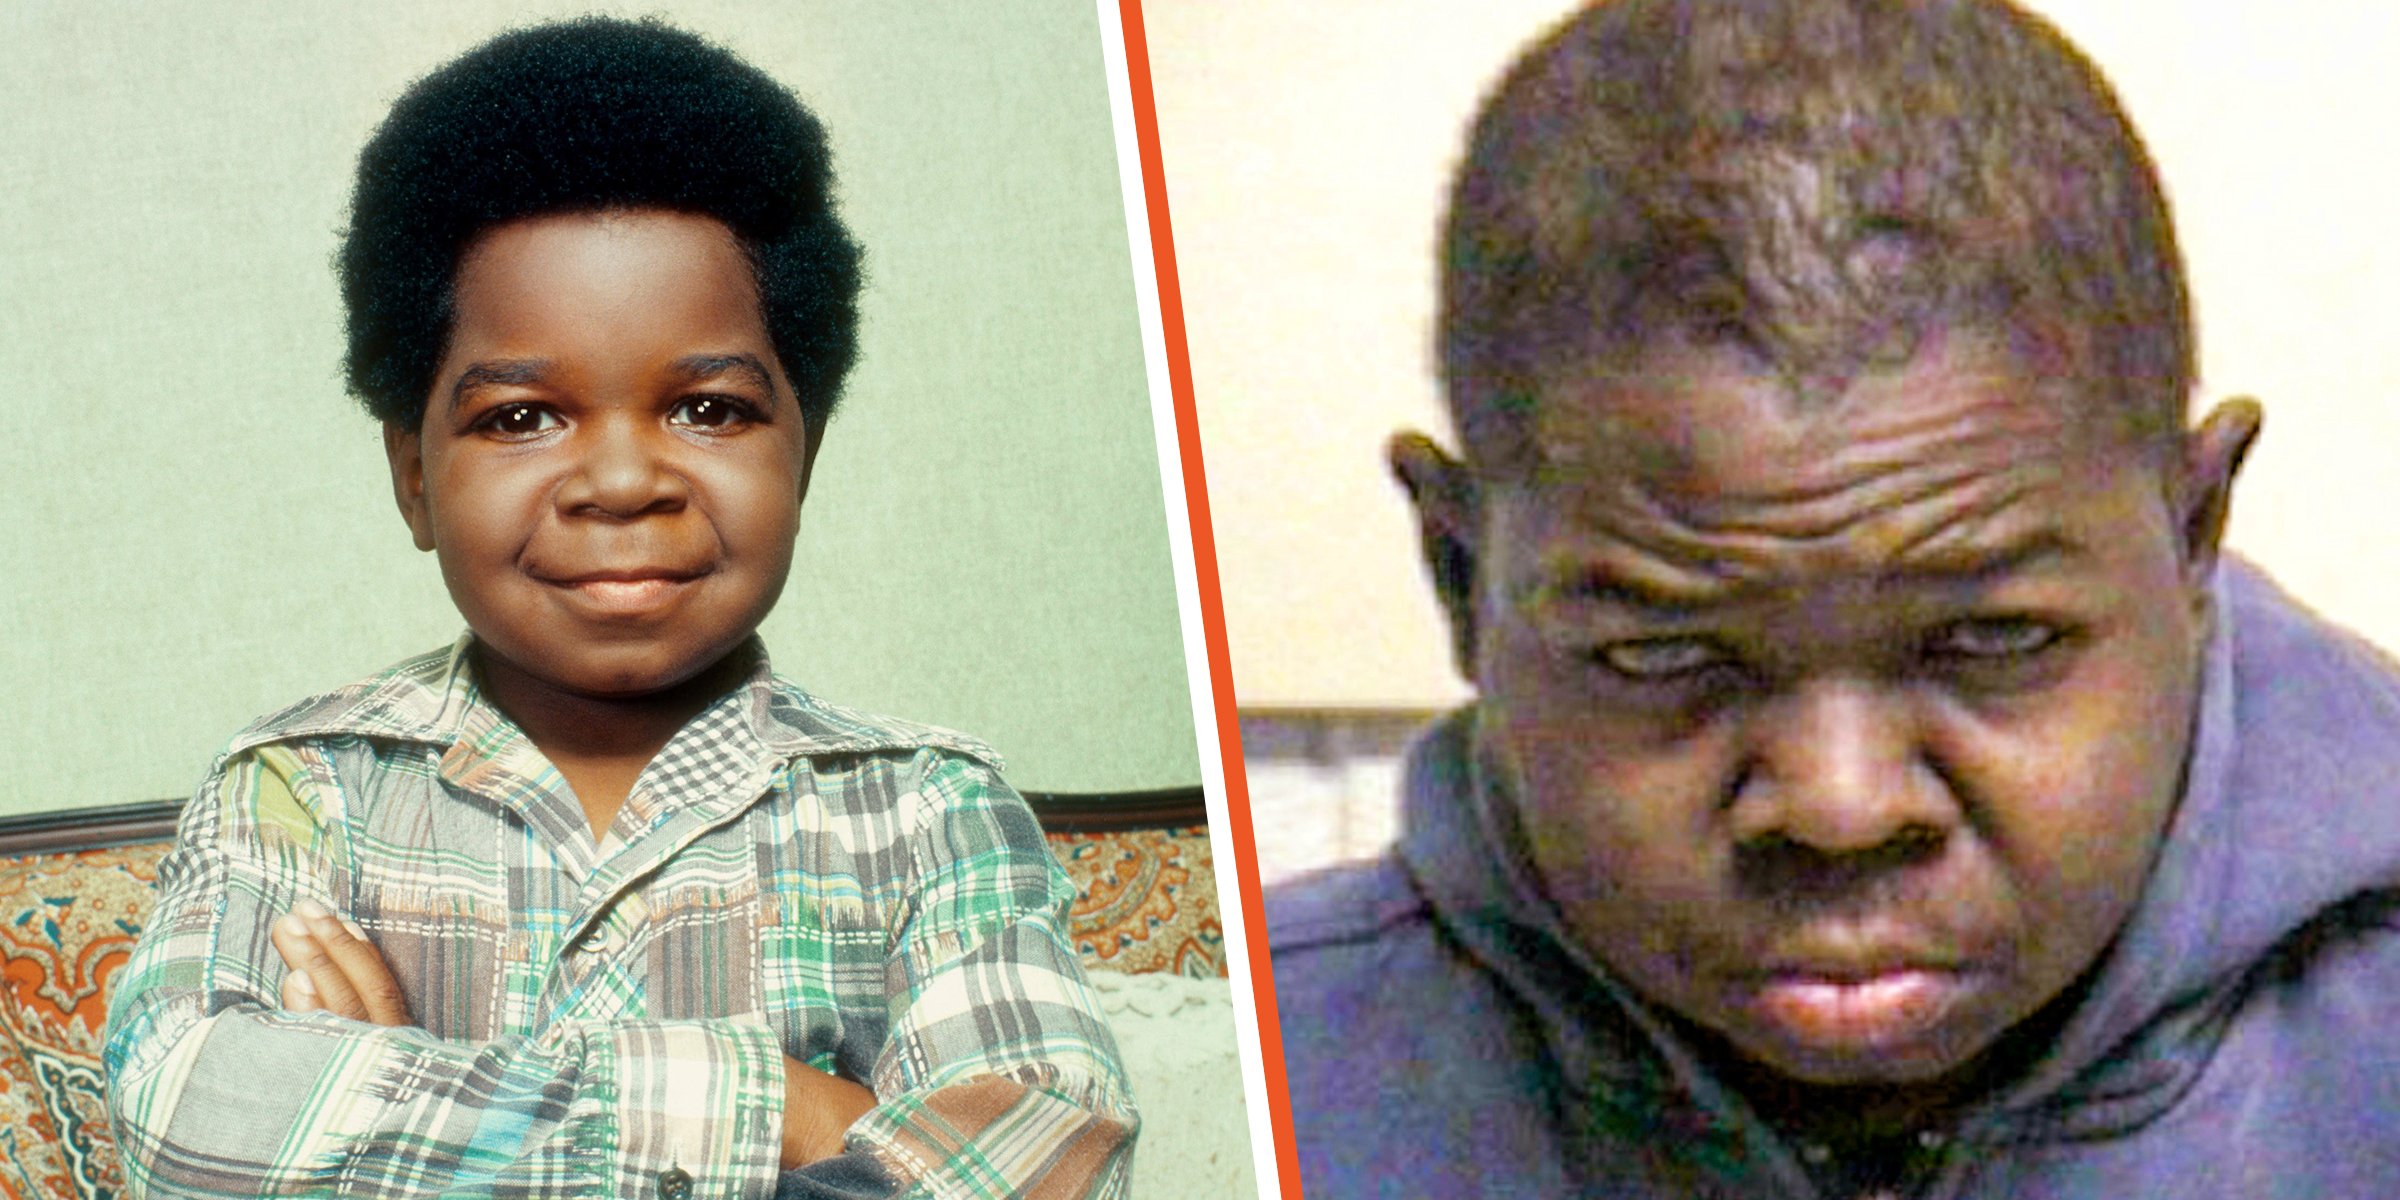 Gary Coleman | Source: Getty Images